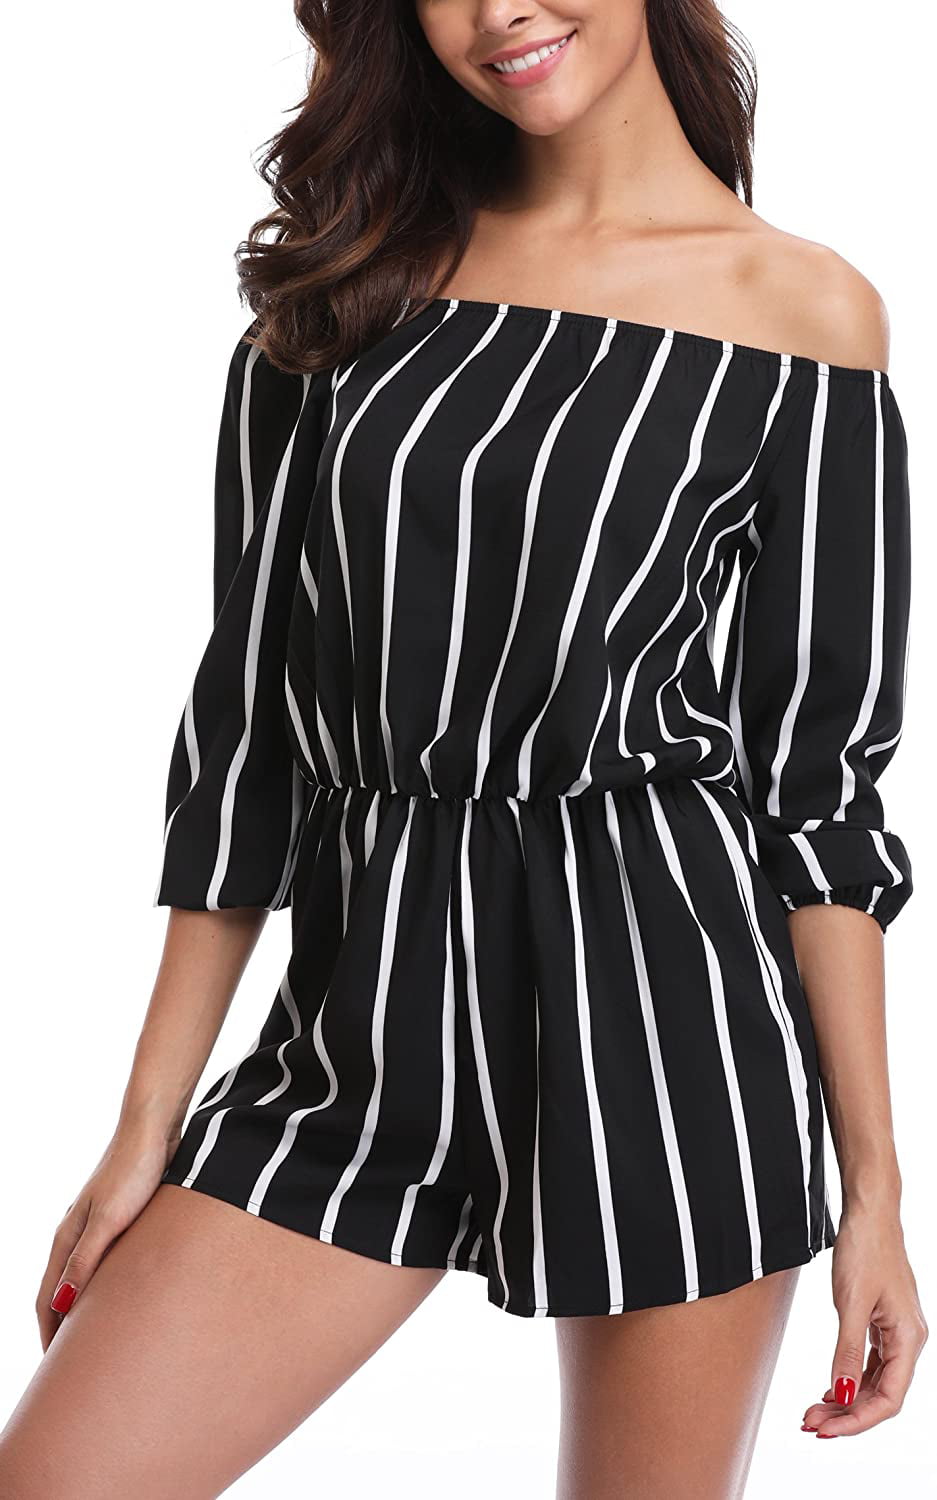 MISS MOLY Rompers for Women Strapless Off The Shoulder Long Sleeve Short Jumpsuits with Belt 